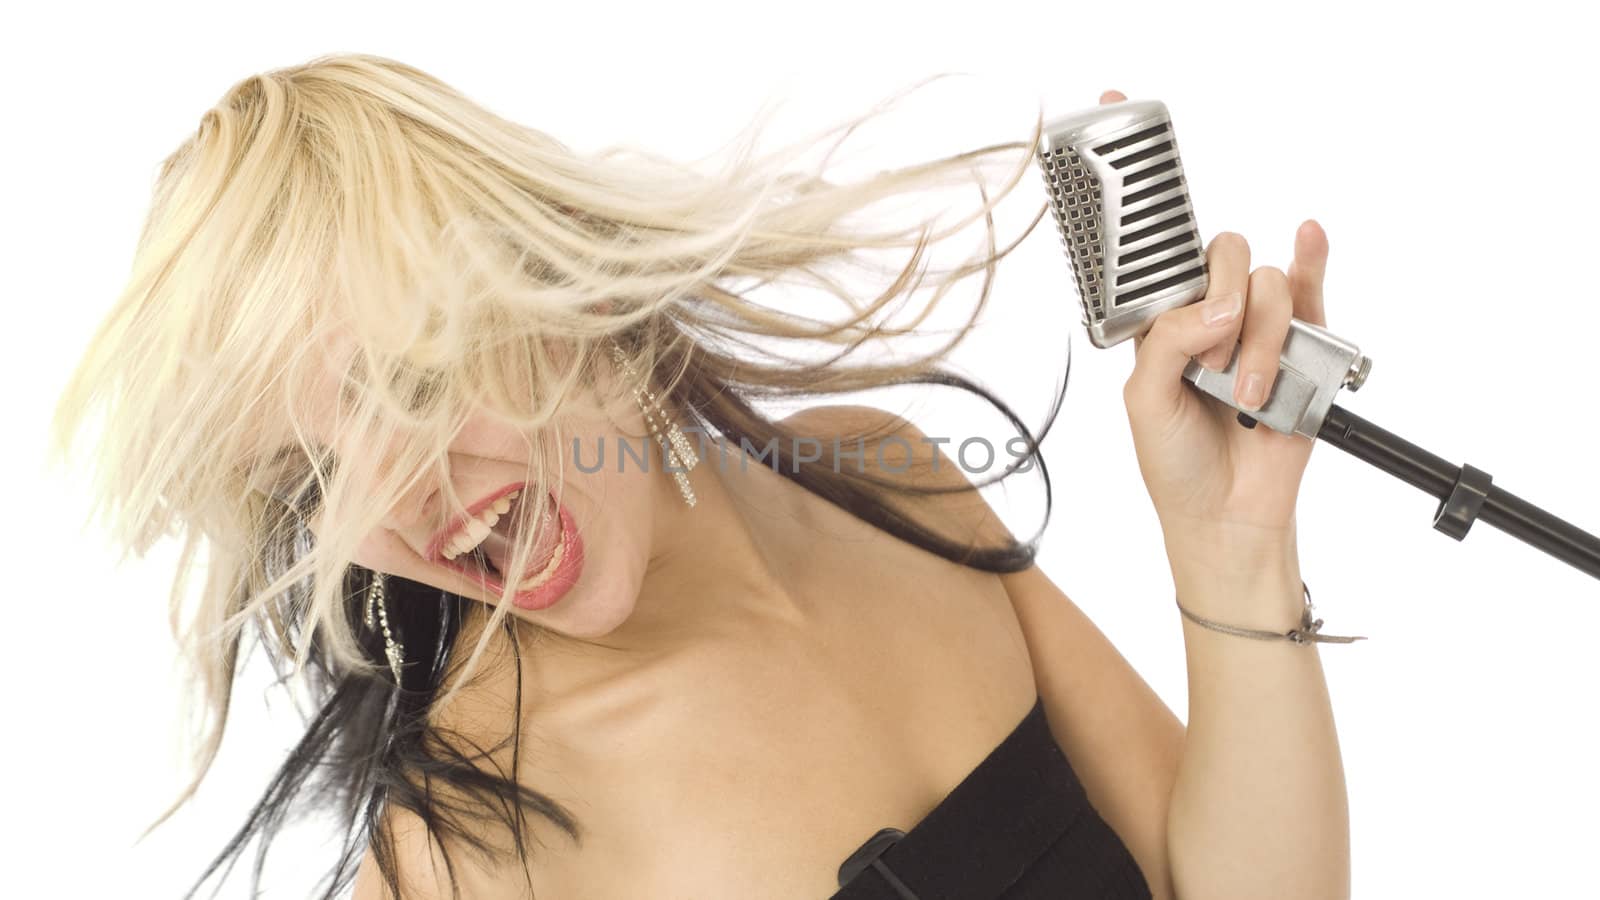 Rocking singer with mouth open, wild hair and microphone